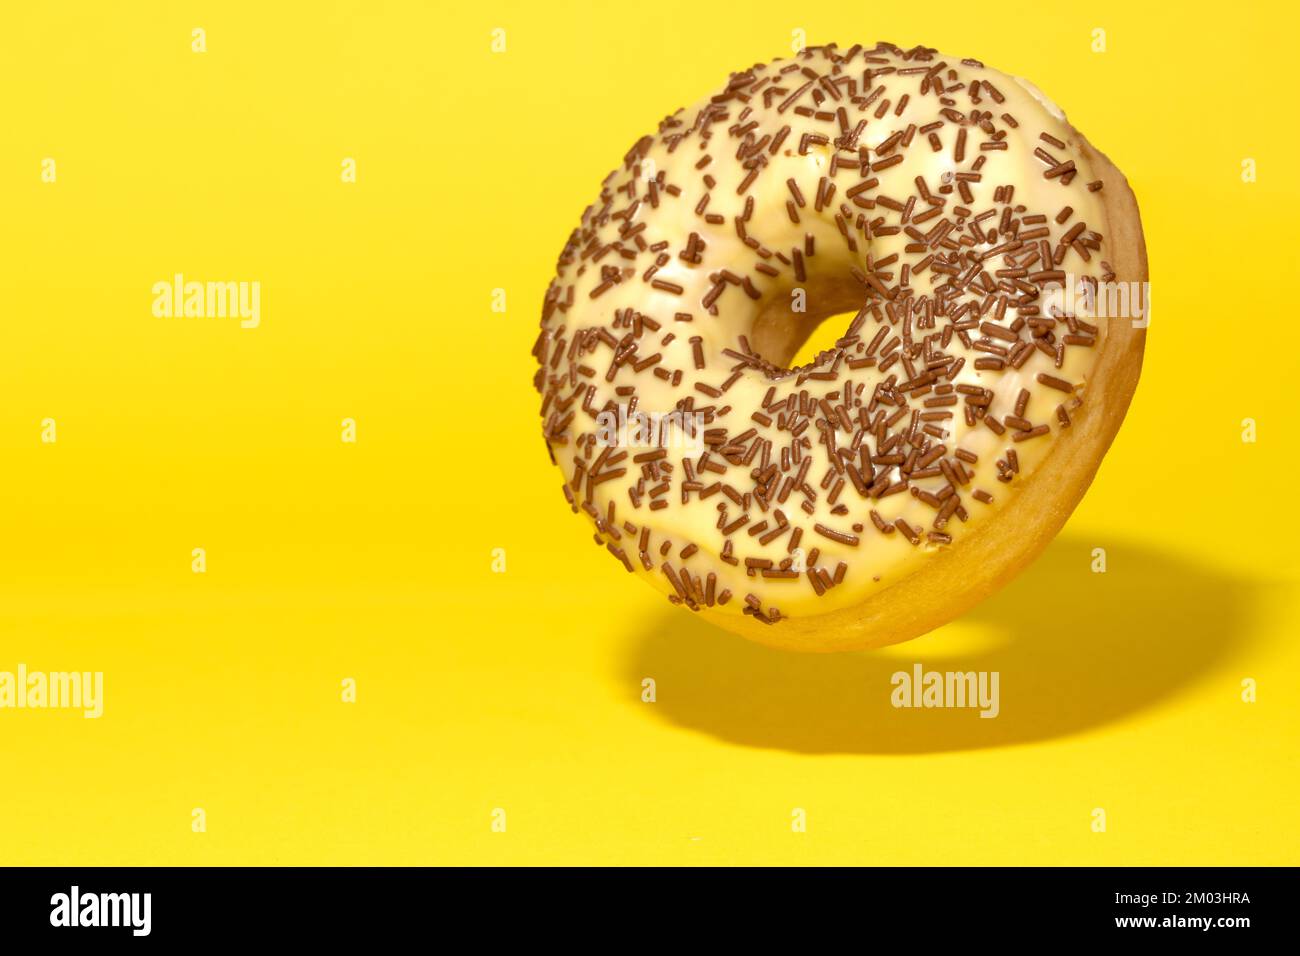 Levitating yellow donut on a yellow background. Creative sweet concept Stock Photo